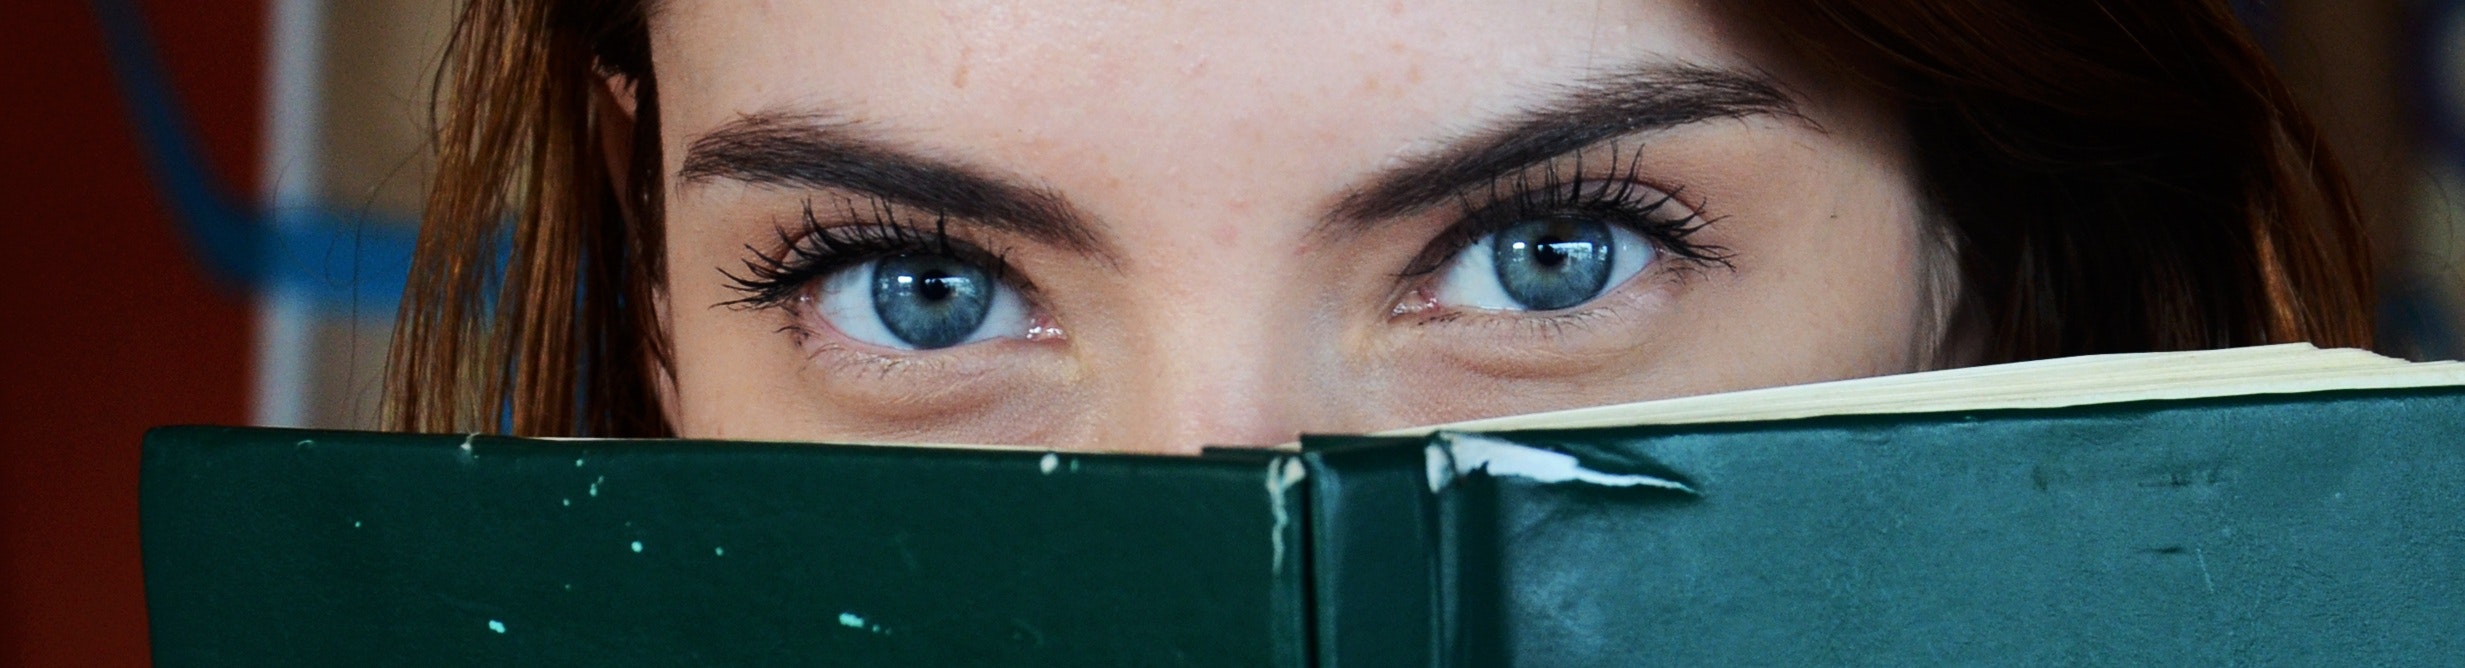 woman with blue eyes reading